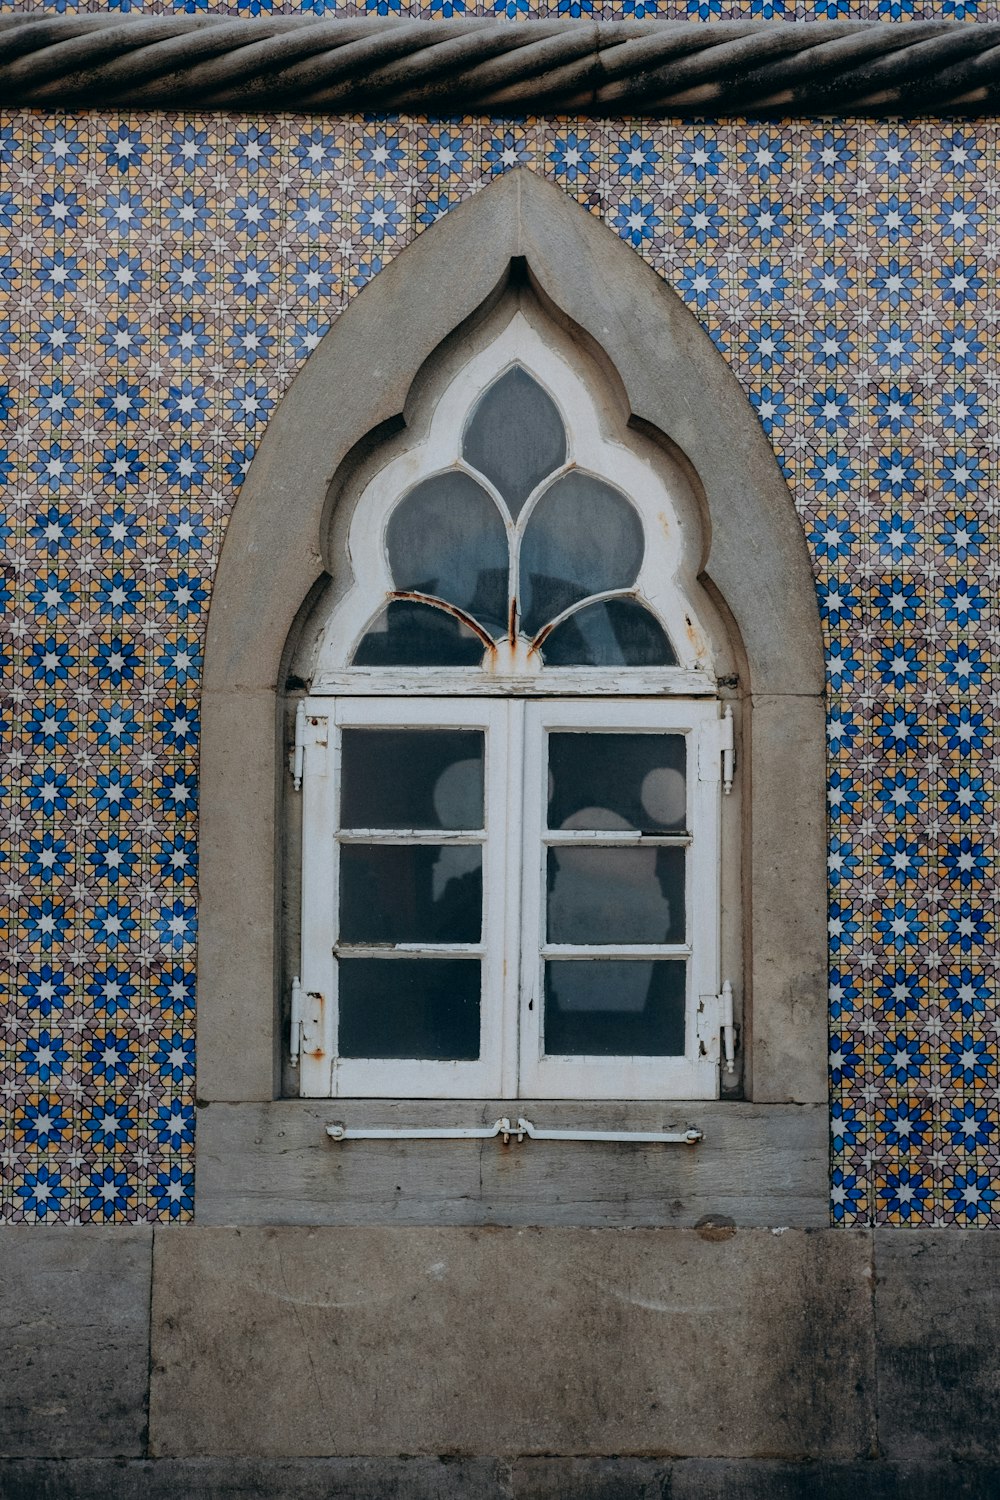 a window in a wall with blue and white tiles